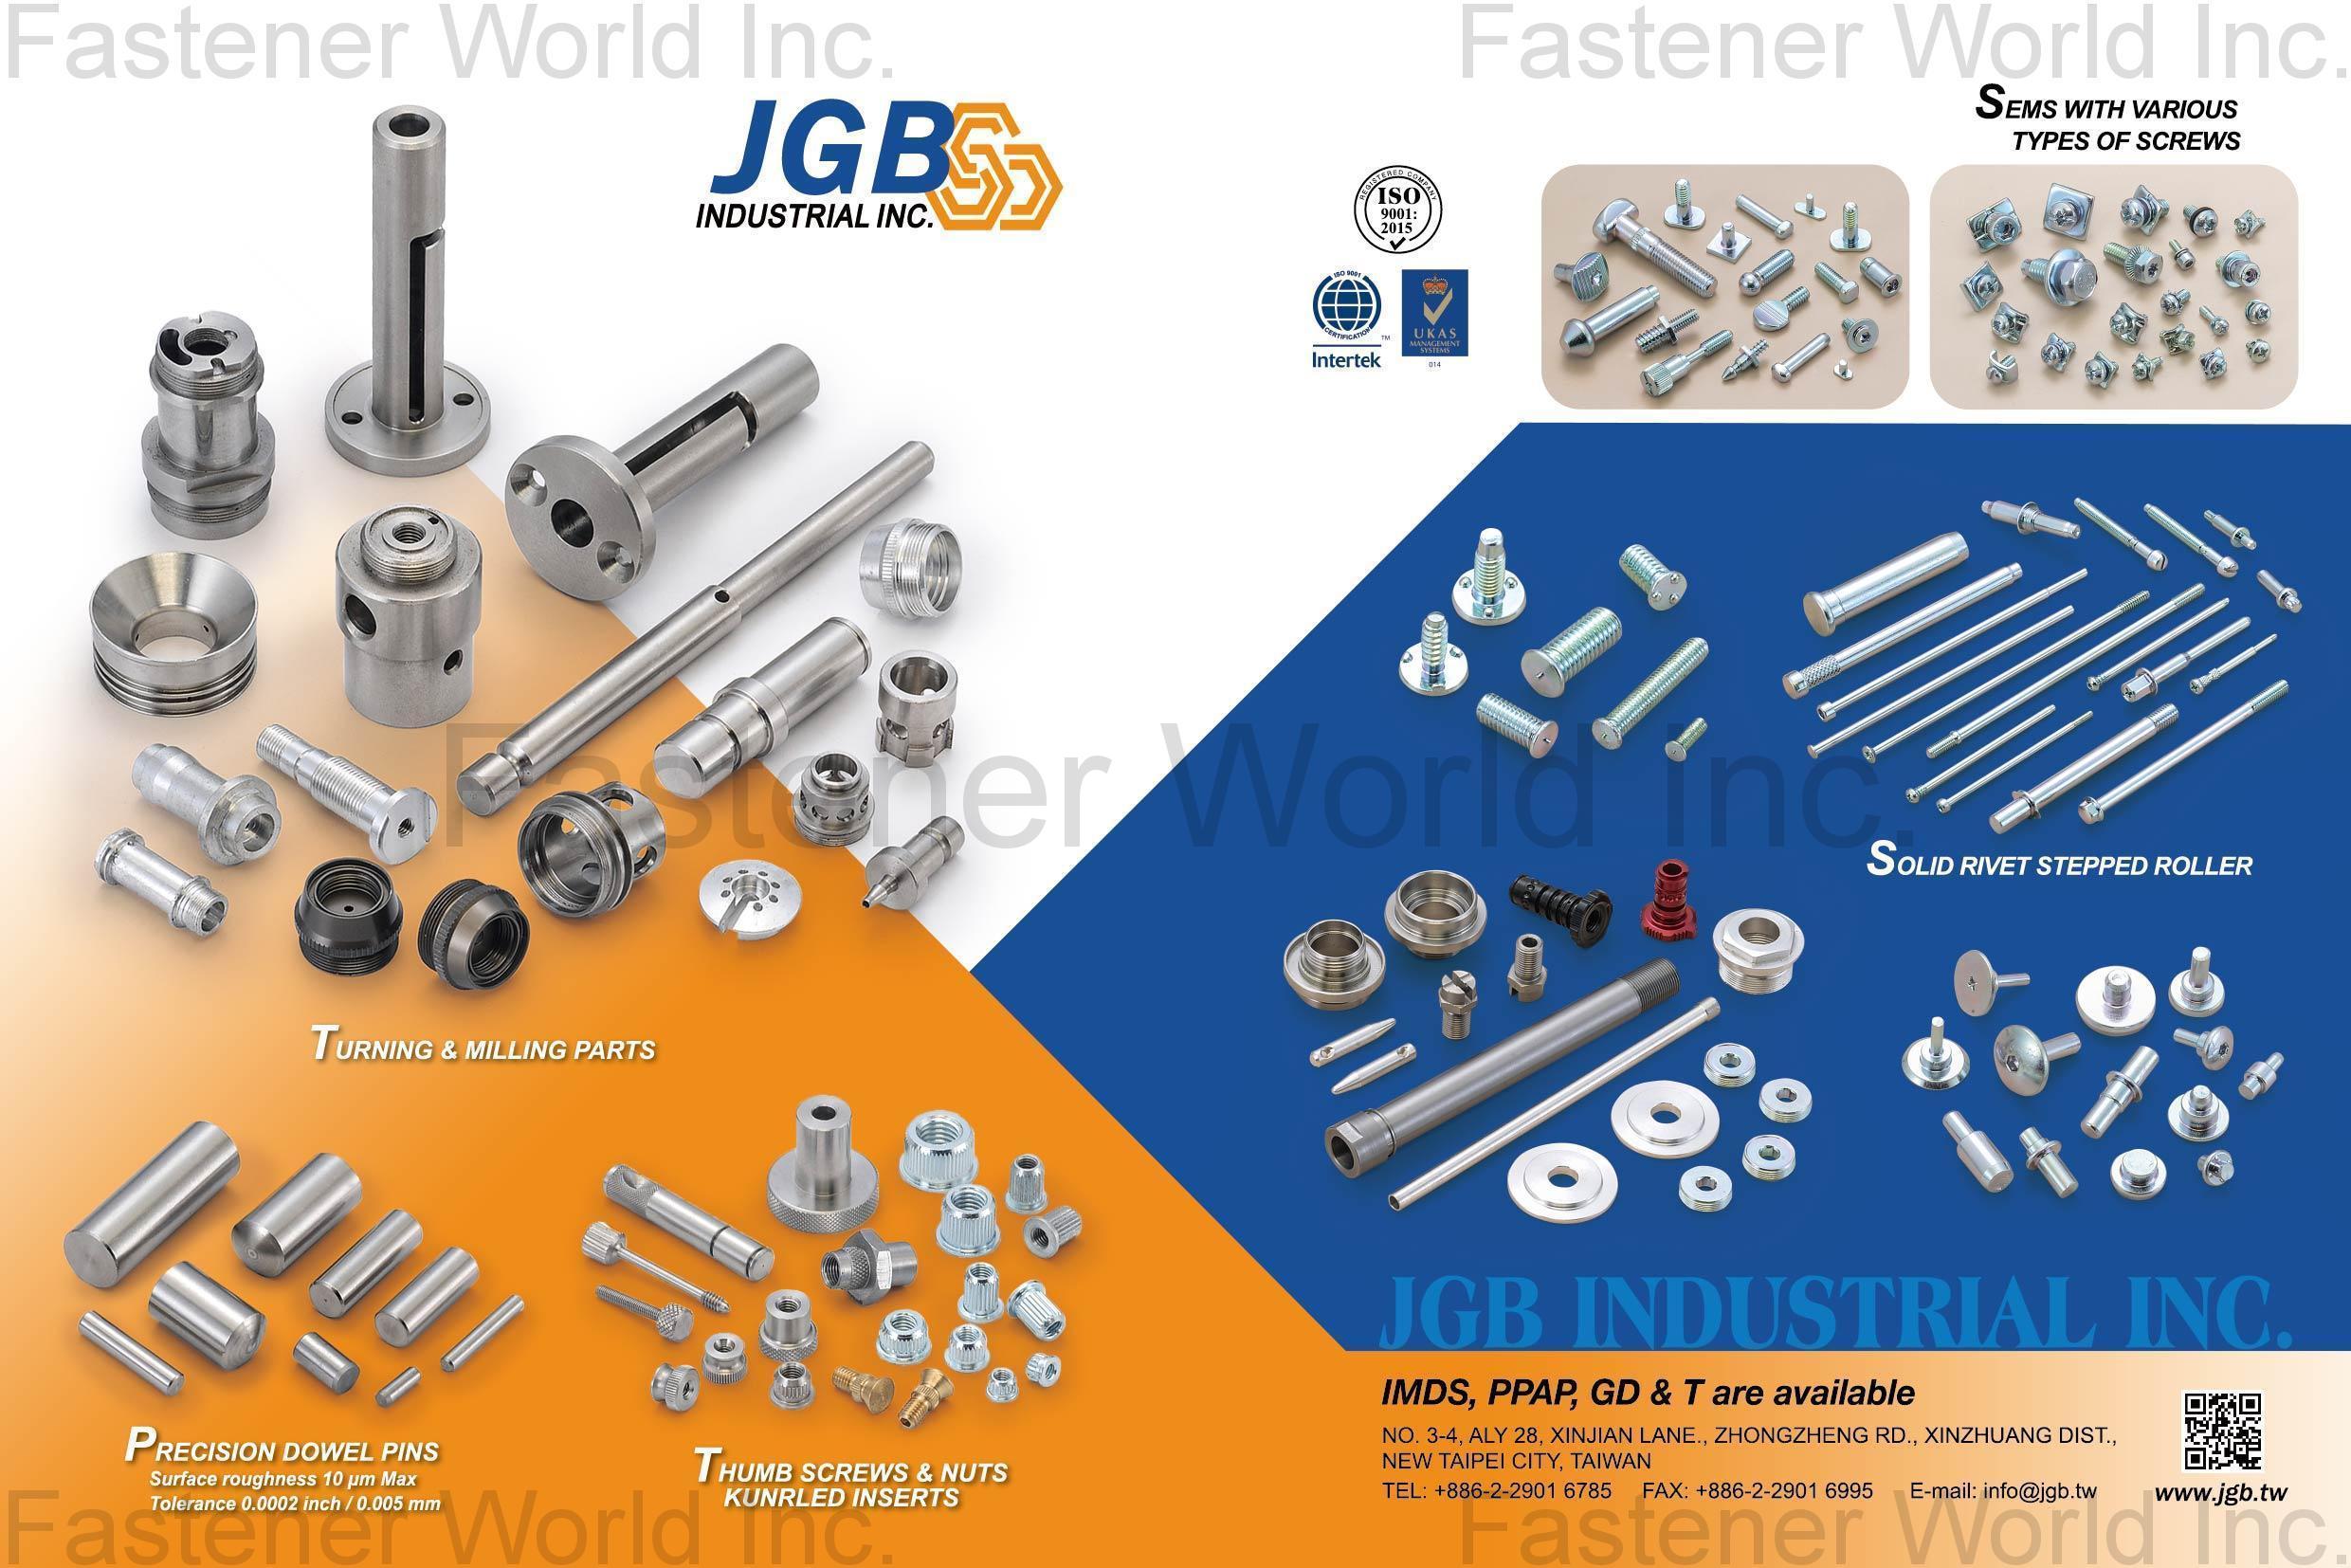 Turning Parts,Precision Metal Parts,Dowel Pins,Thumb Nuts,Milled Nuts,Shoulder Screws,Thumb Screws,Brass Insert,Milled Bolts,Special Cold / Hot Forming Parts